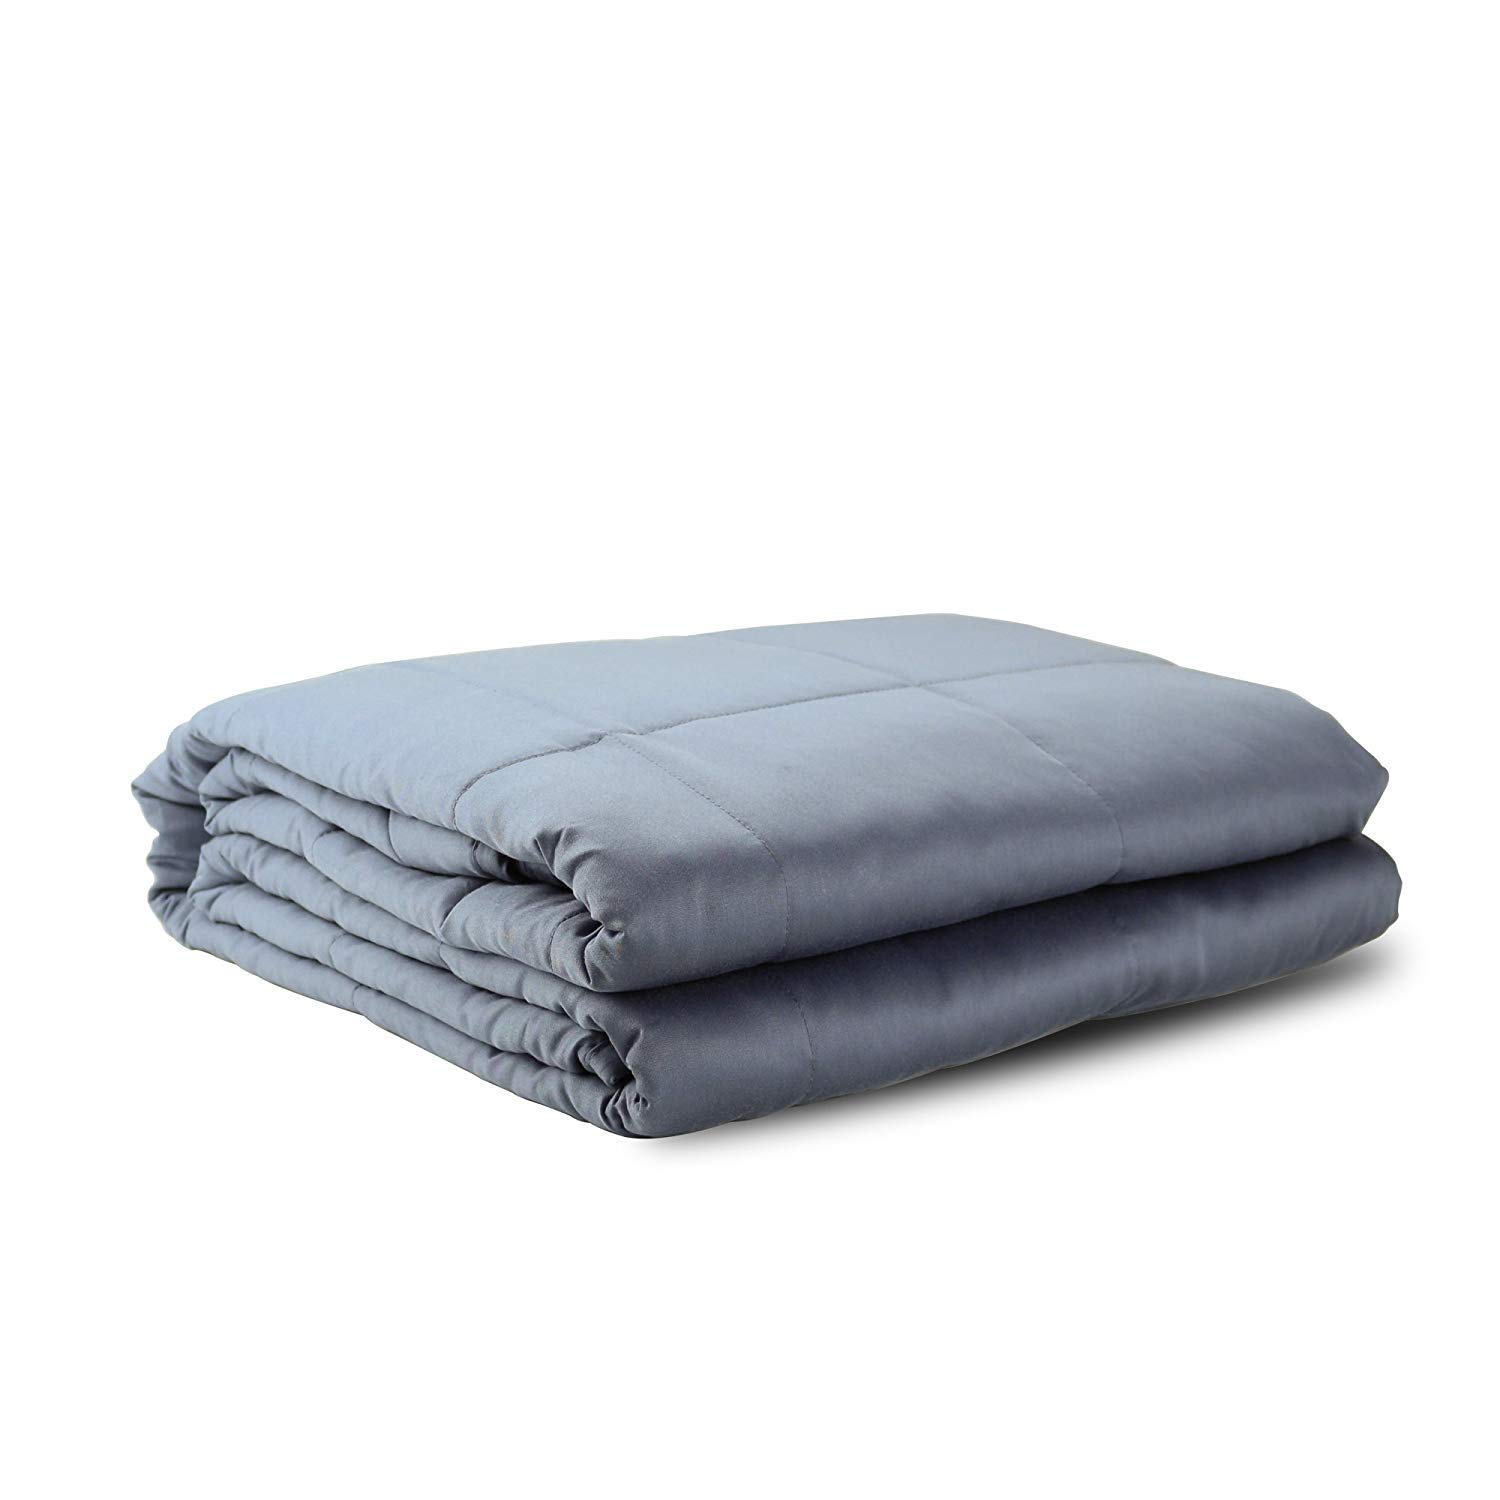 YnM cooling weighted blanket